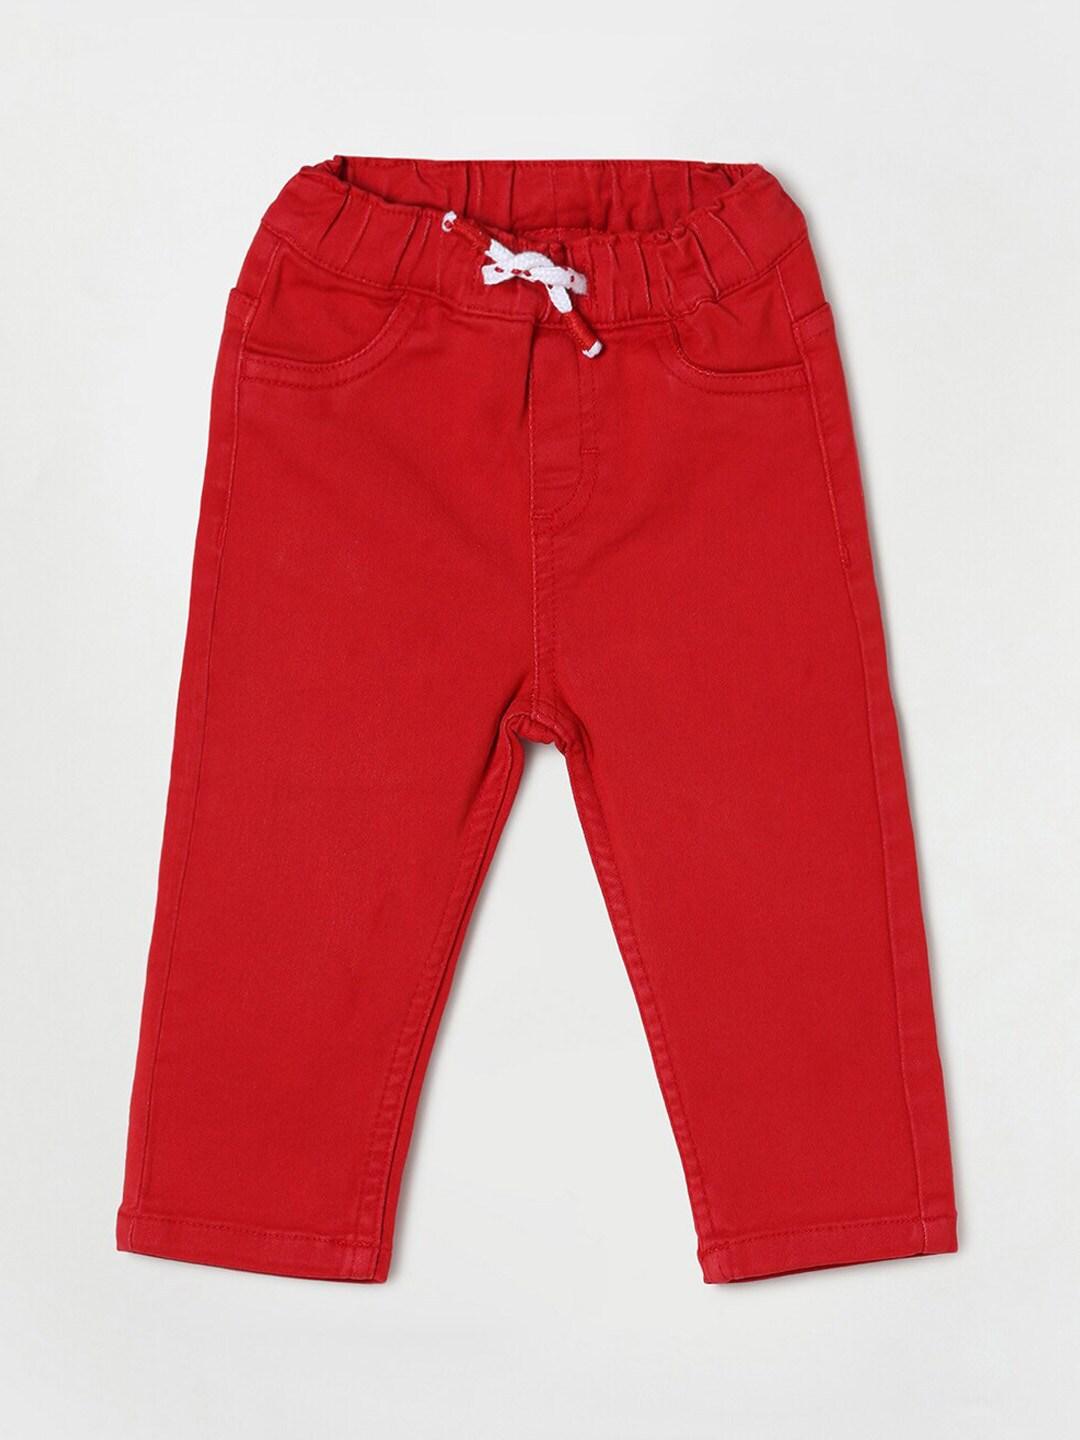 juniors-by-lifestyle-boys-red-solid-cotton-track-pants